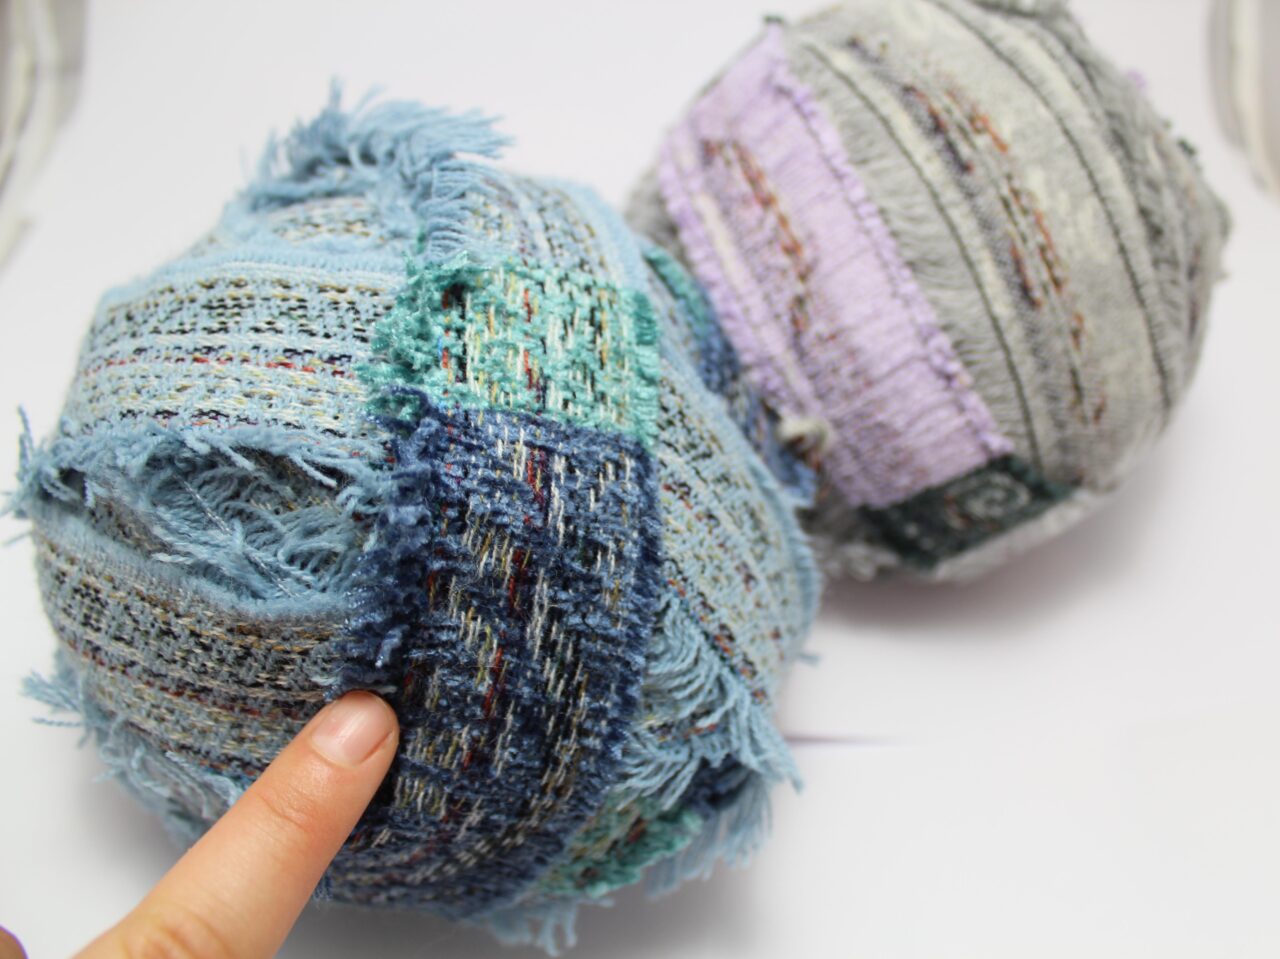 Balls of chenille yarn with stitching. Strips for rag rugging.